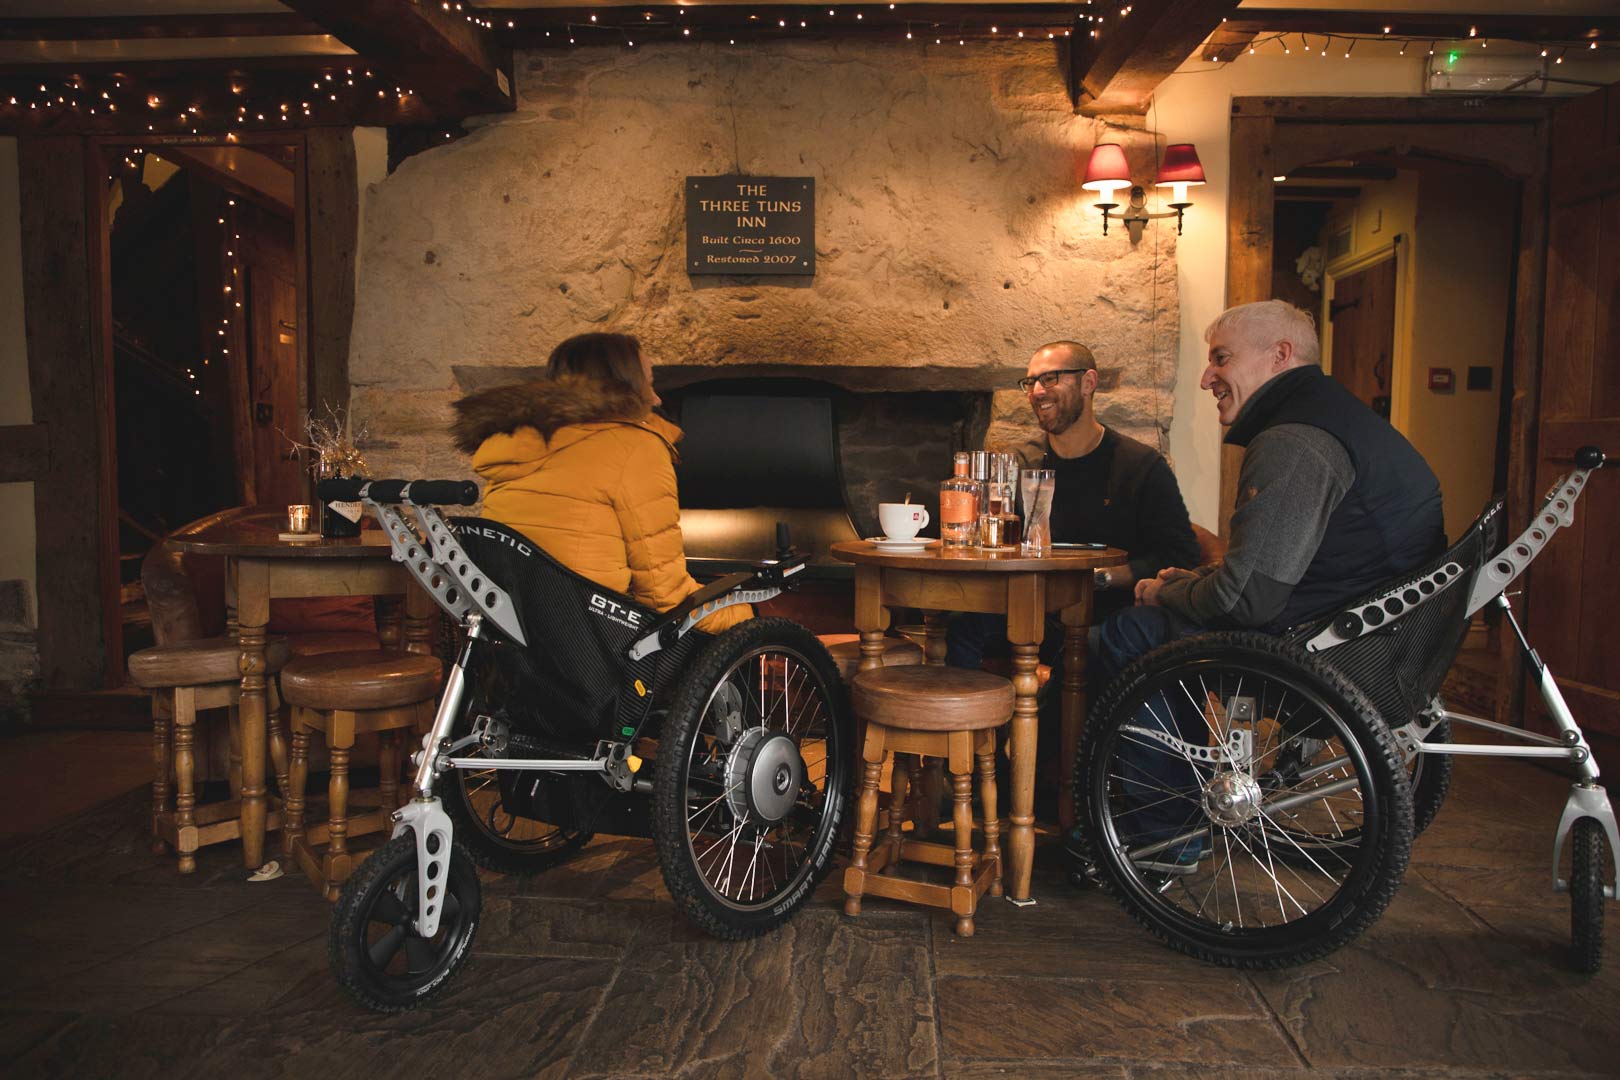 Two Trekinetic wheelchair users meeting a friend in the pub for a drink